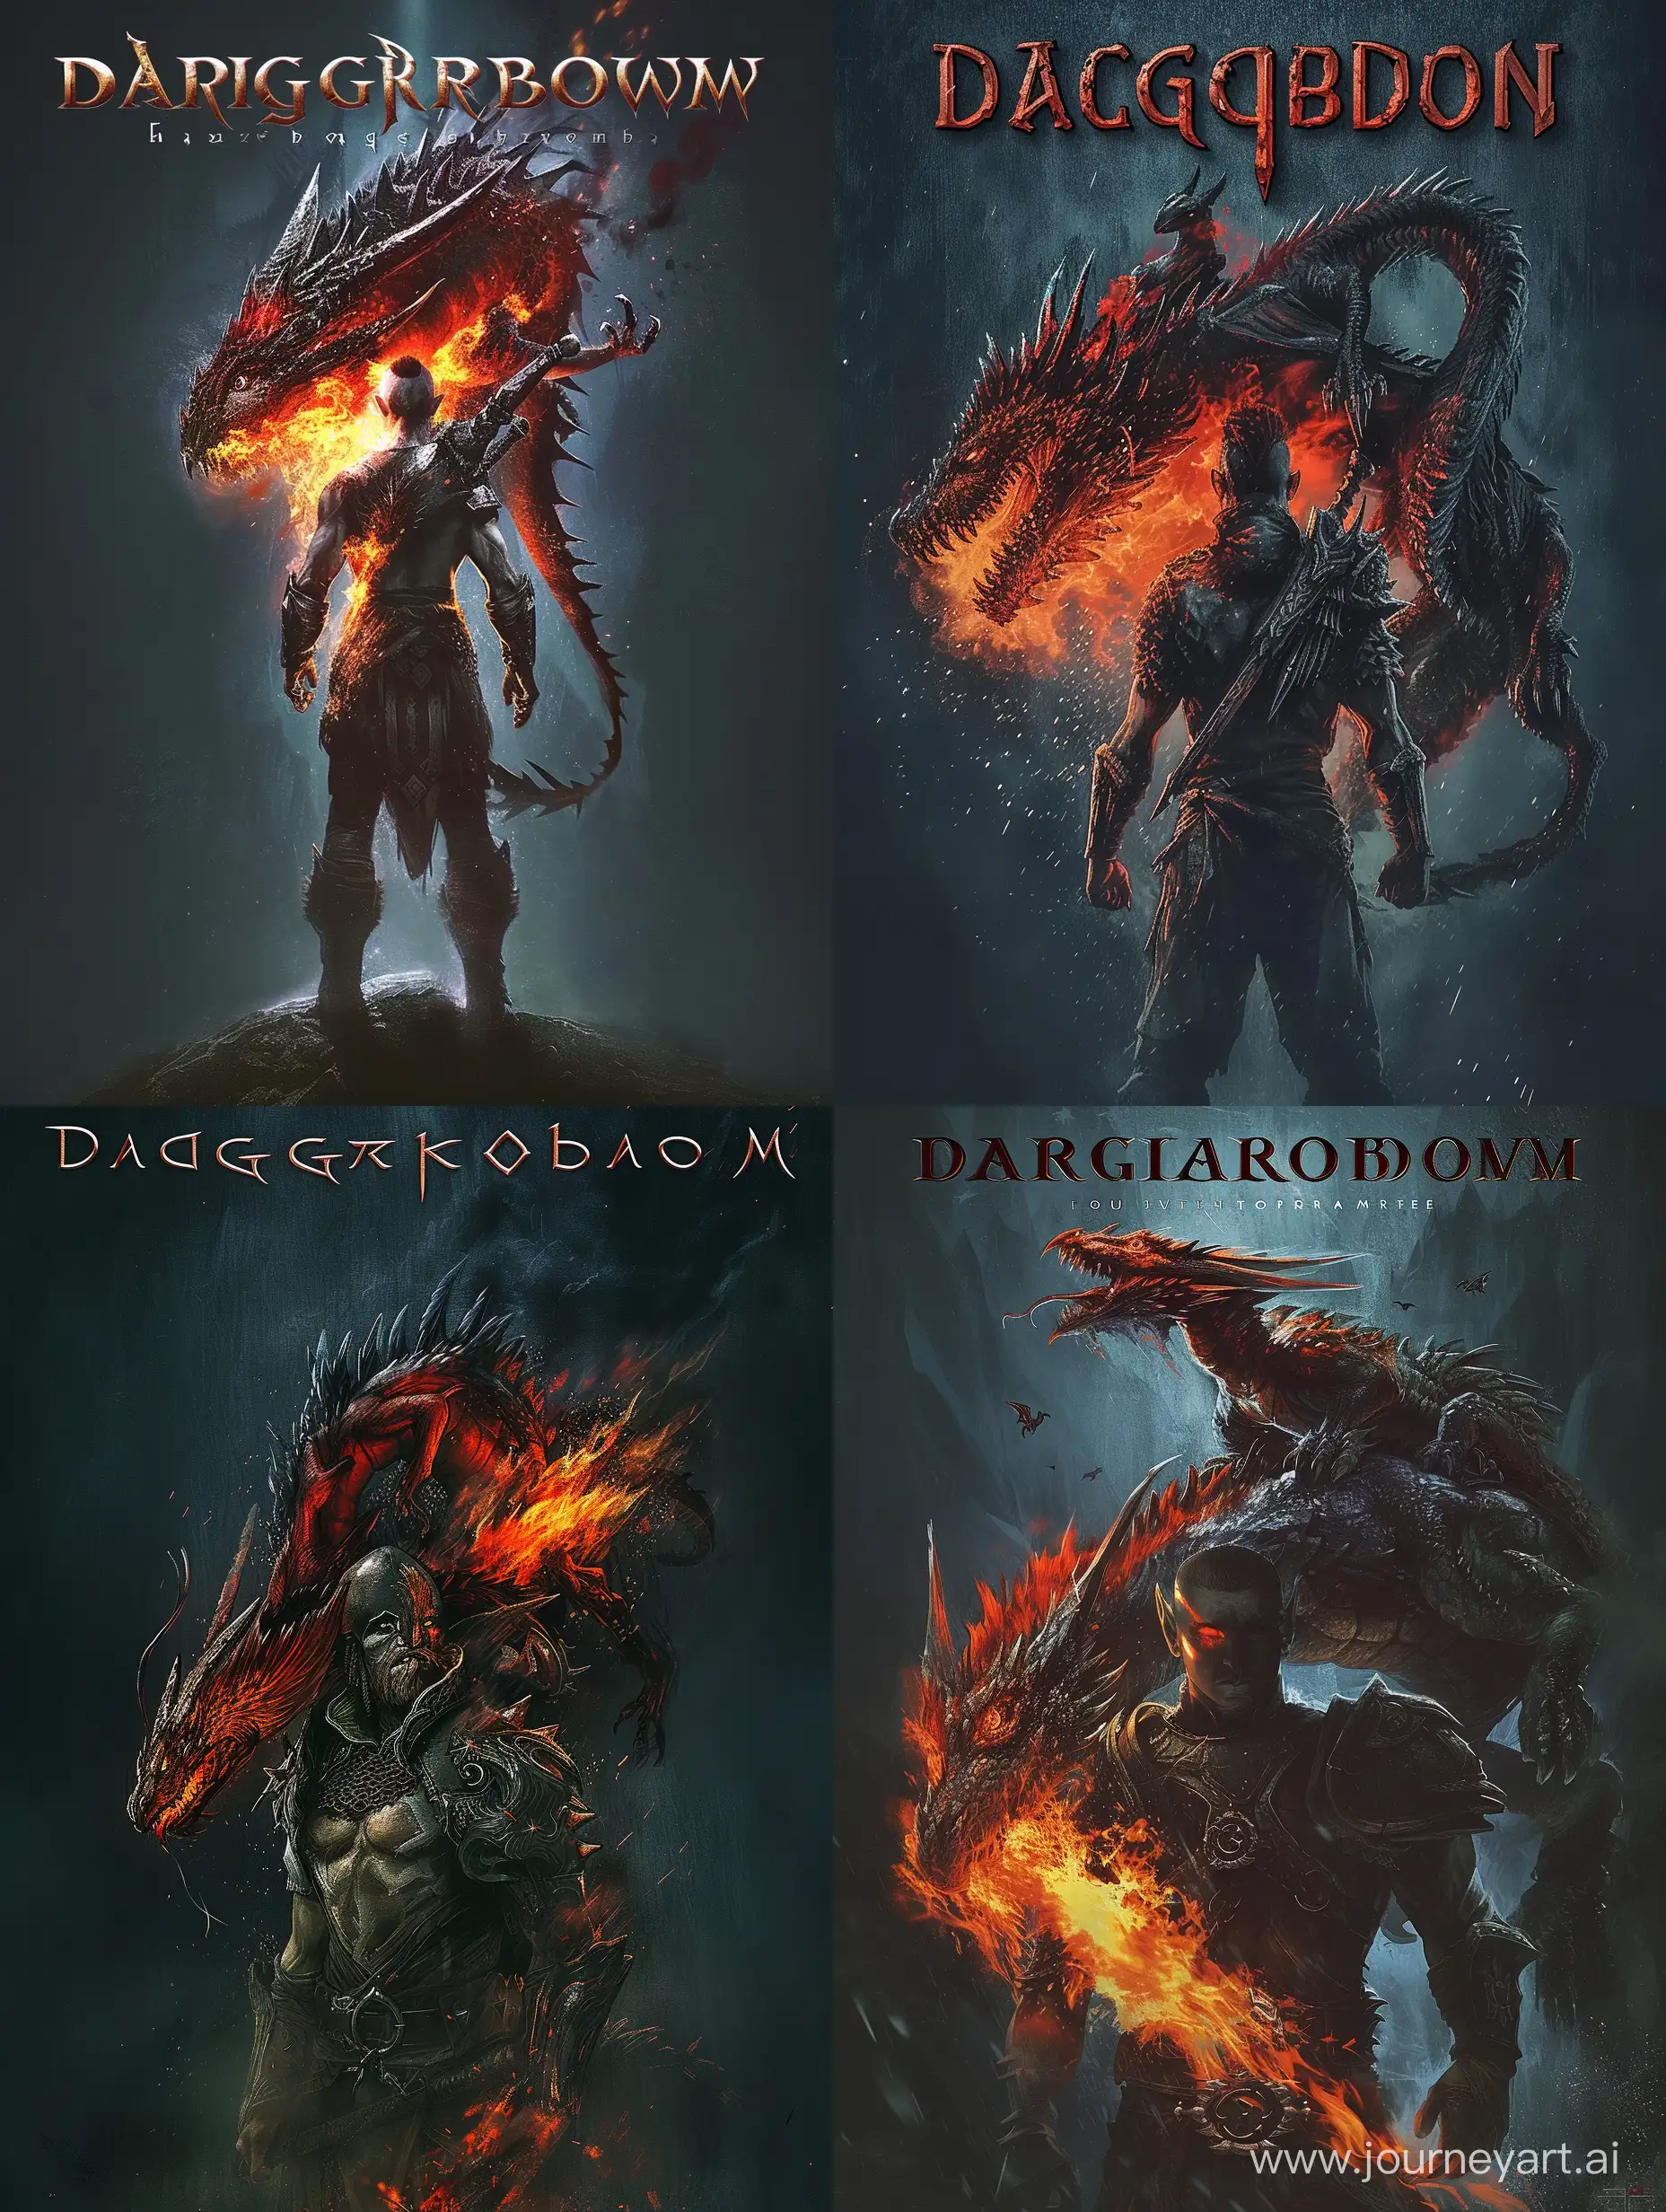 A picture in dark colors for a group called dragonborn (from the game skyrim). In the picture, a dragonborn with a red and black dragon on his back, who breathes fire. At the top, dragonborn is written in large letters in a skyrim-style font